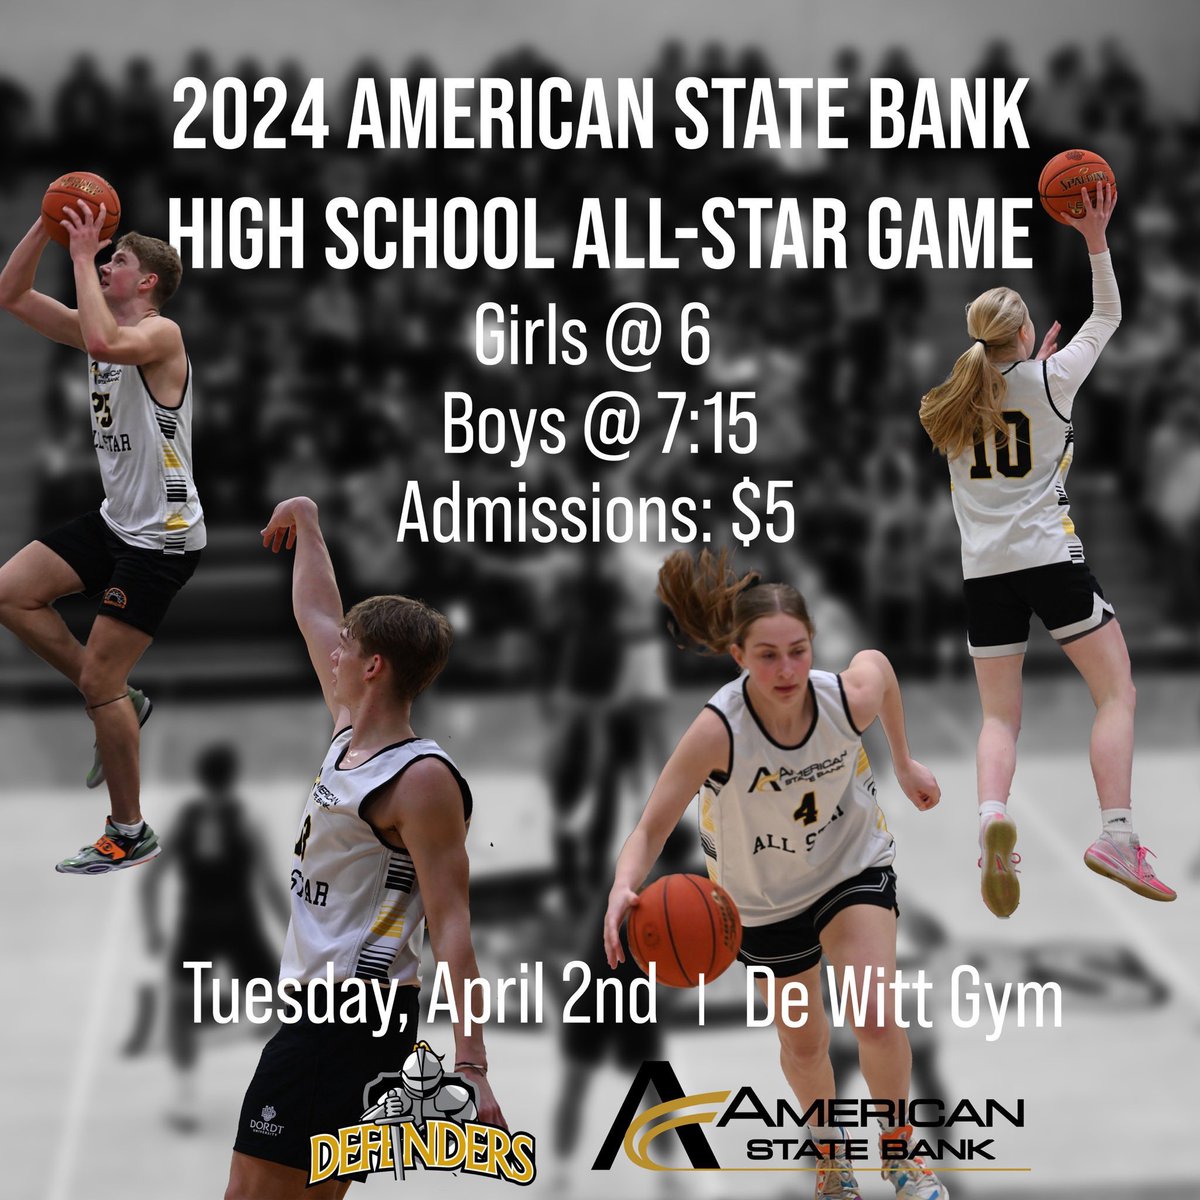 The 2024 American State Bank High School All-Star Basketball Games are happening Tuesday night, April 2 at the De Witt Gym. Girls game at 6pm boys to follow at 7:15